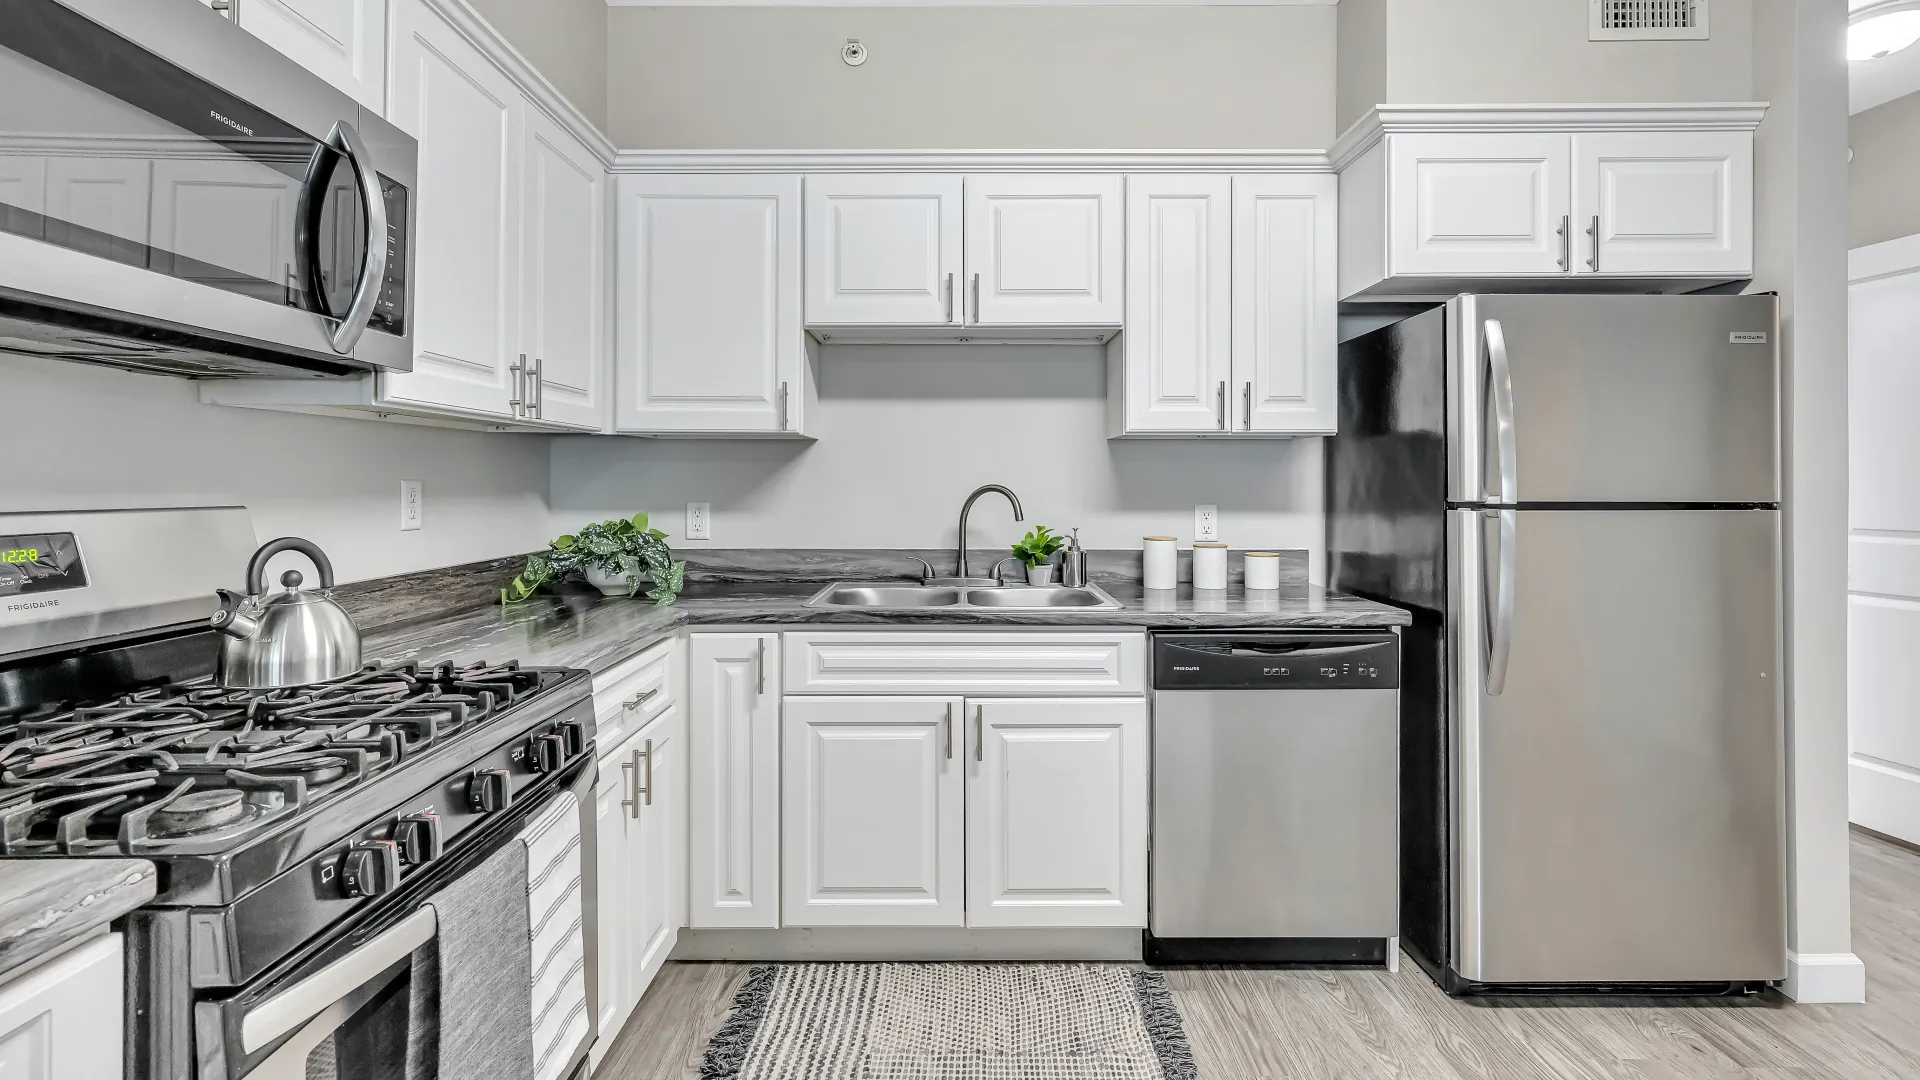 A modern, well-lit kitchen with stainless steel appliances, white cabinets, black-fusion granite-like countertops, wood-like flooring, ample storage, fridge, stove, dishwasher, microwave, and a double sink.